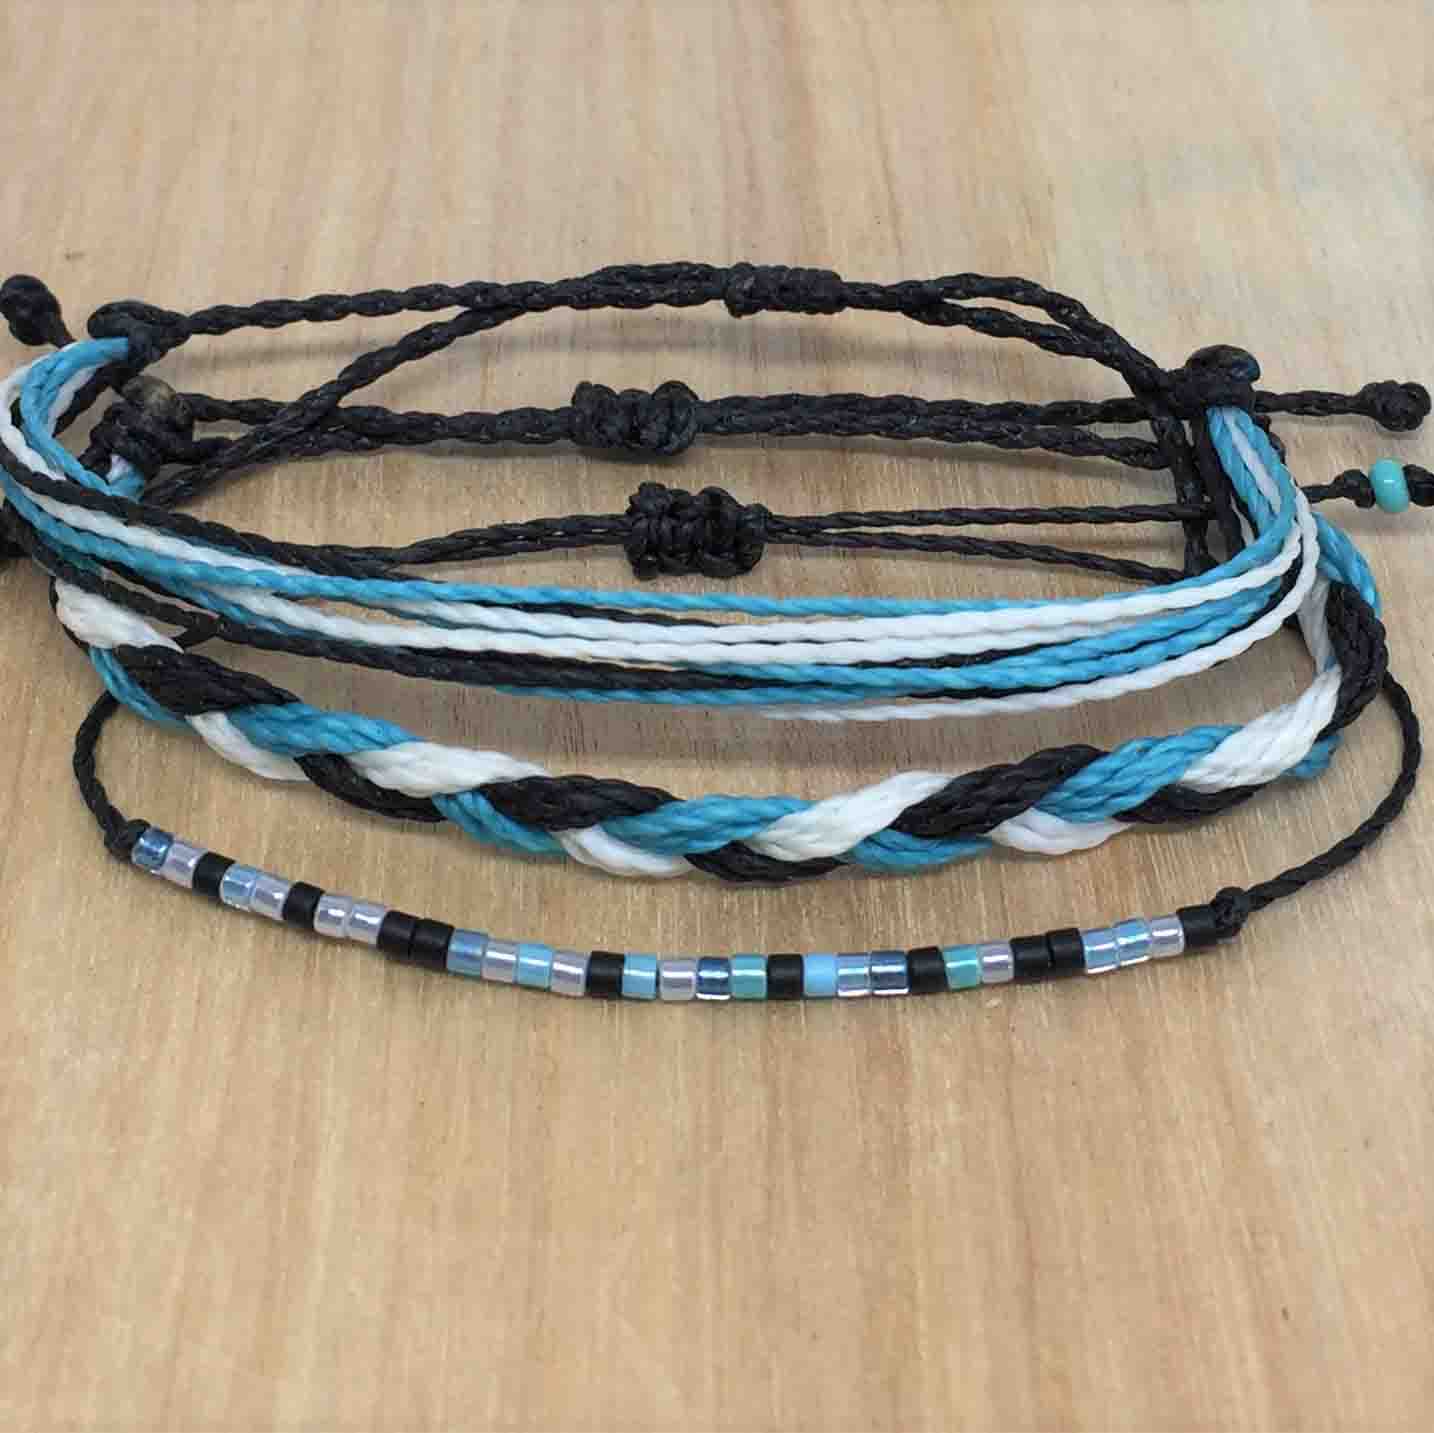 How to make easy bracelets with strings @CraftsEasy - YouTube